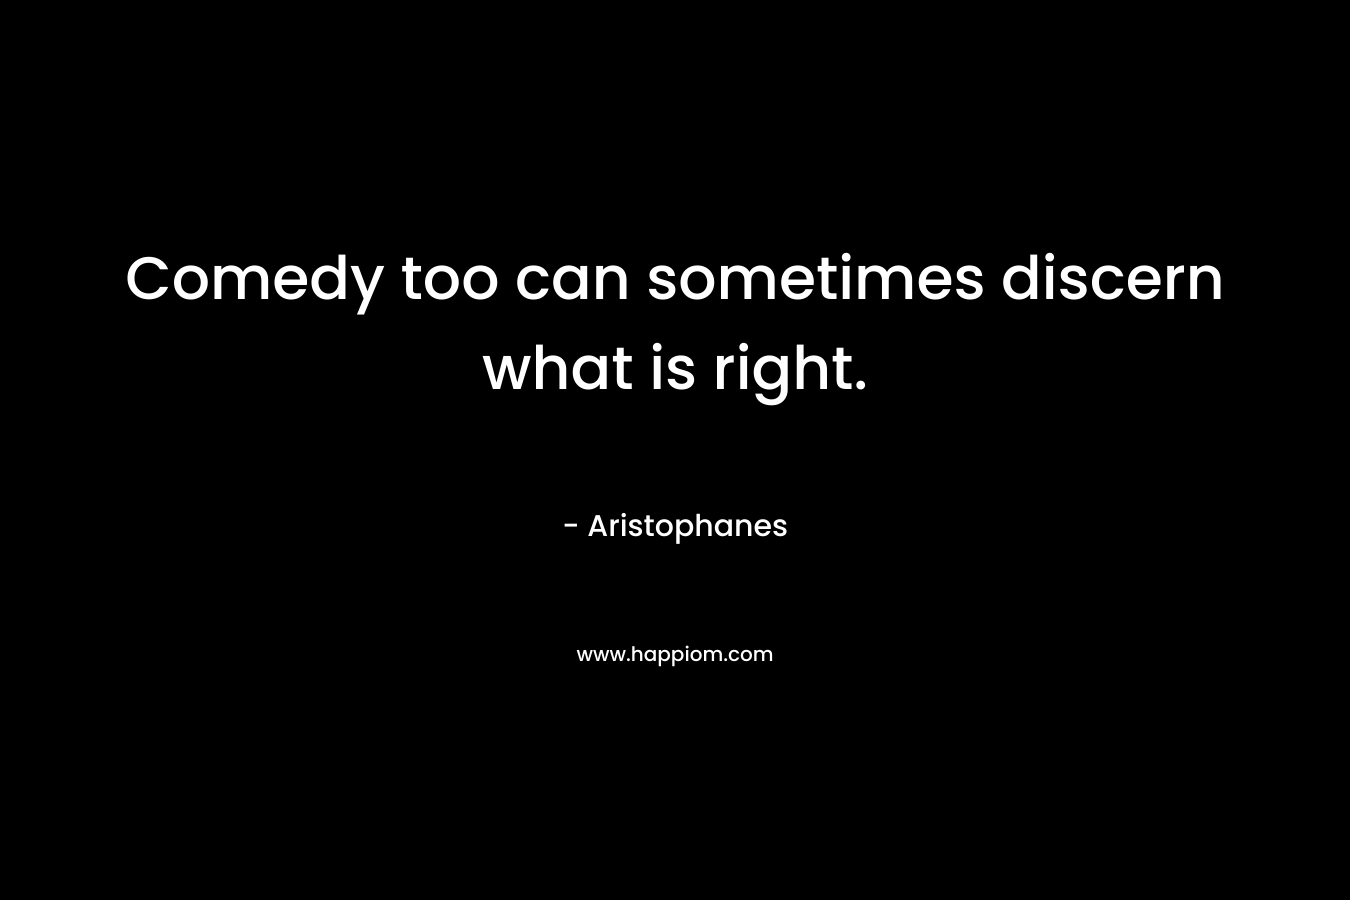 Comedy too can sometimes discern what is right. – Aristophanes